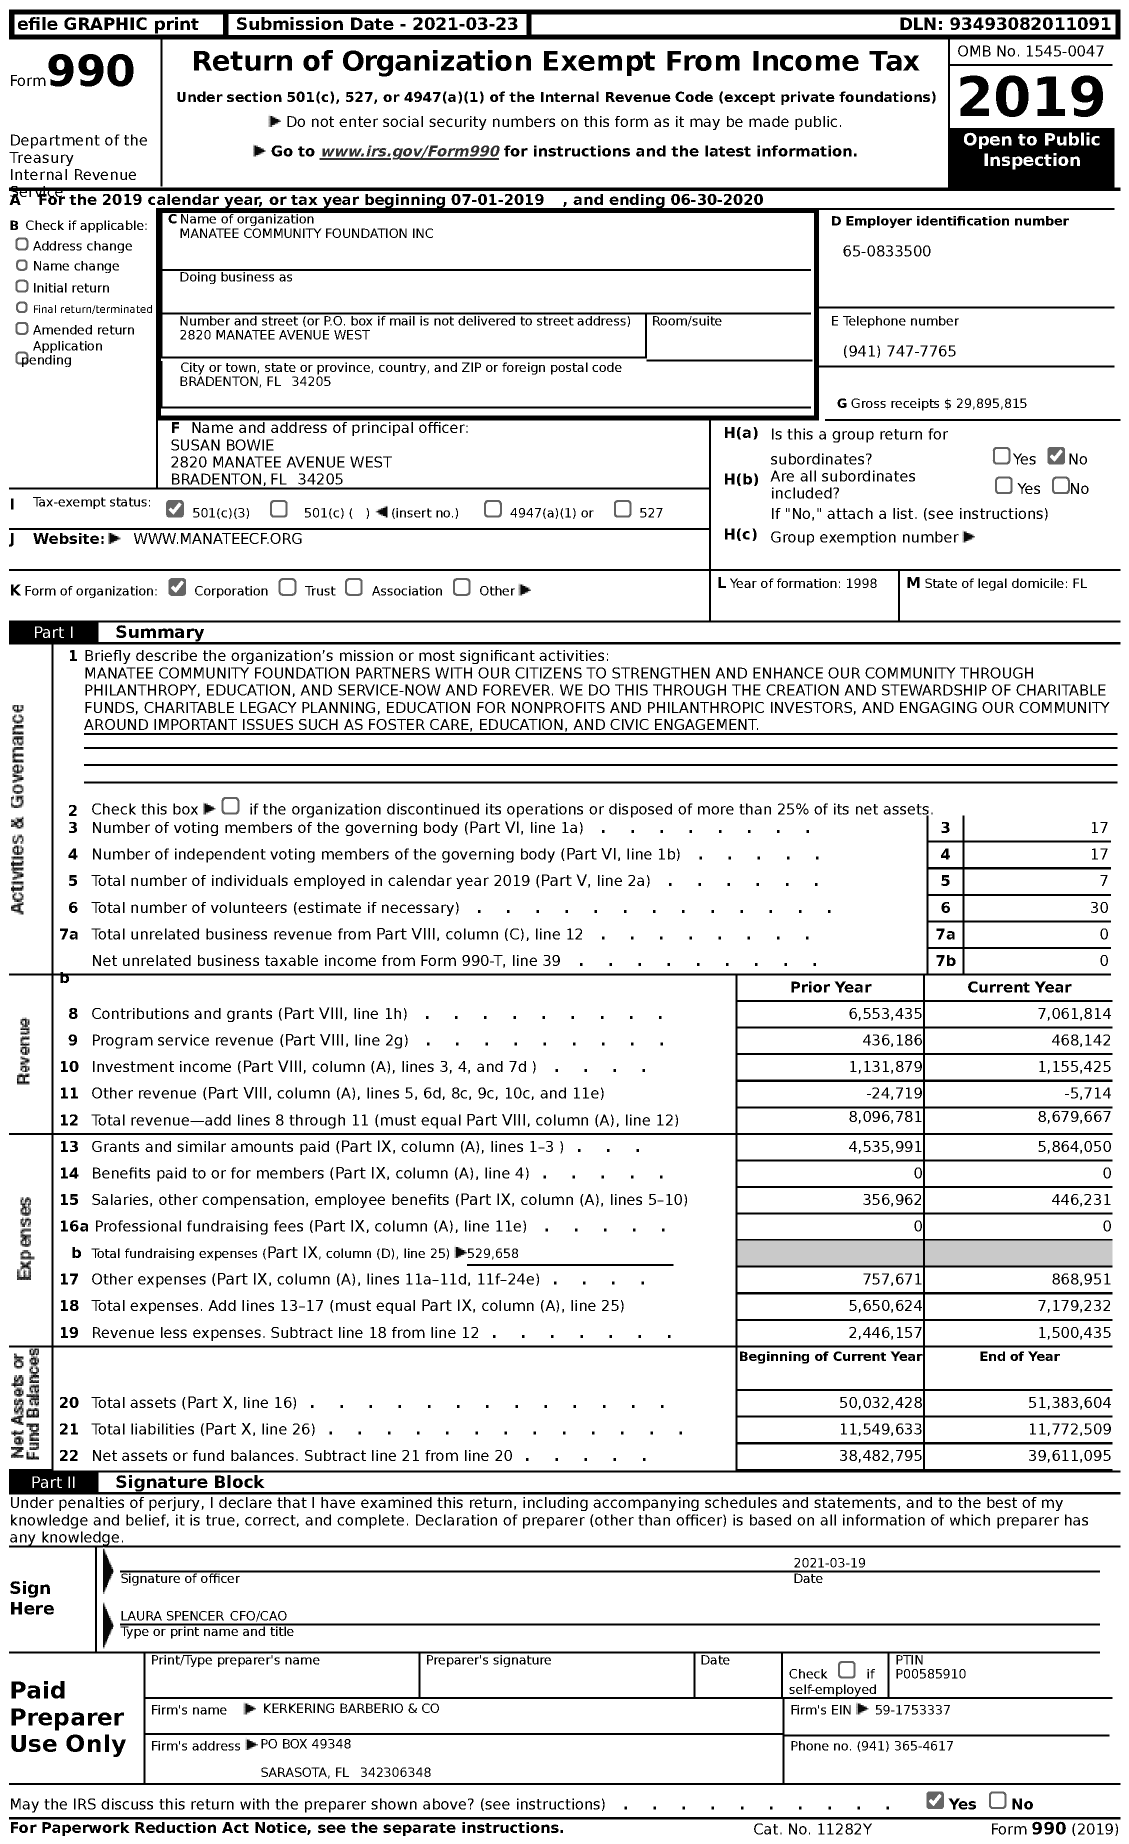 Image of first page of 2019 Form 990 for Manatee Community Foundation (MCF)